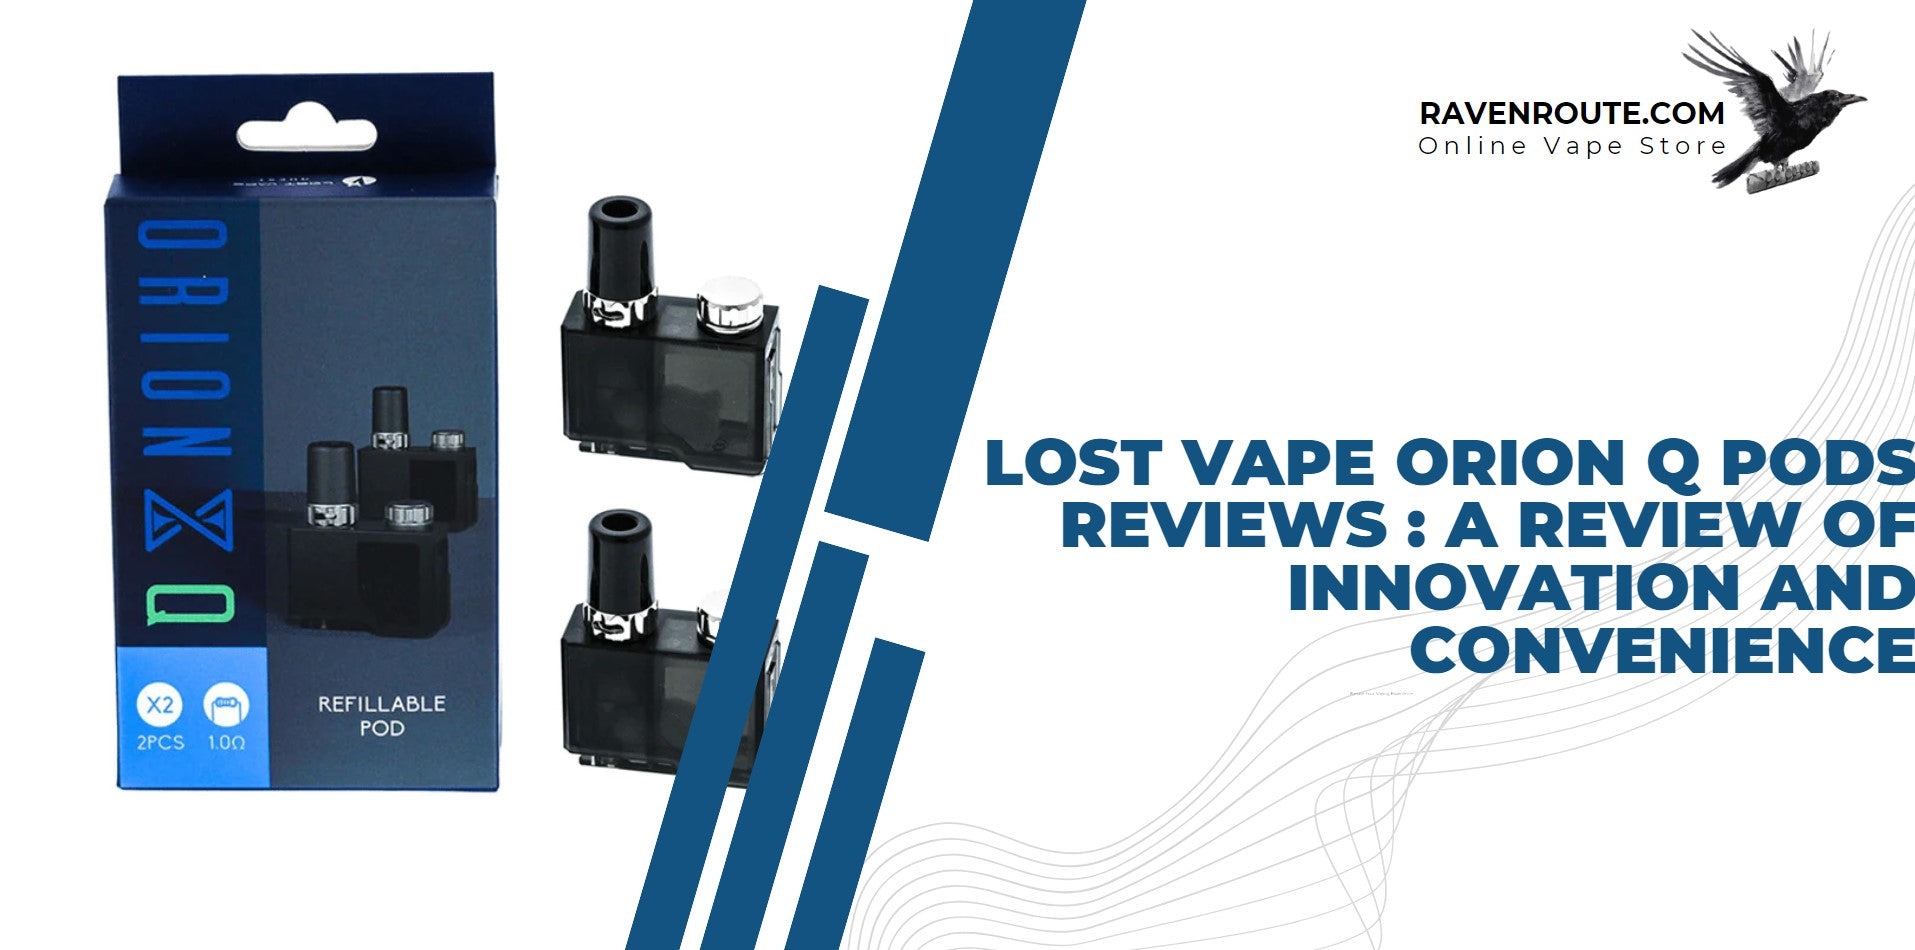 Lost Vape Orion Q Pods Reviews: A Review of Innovation and Convenience